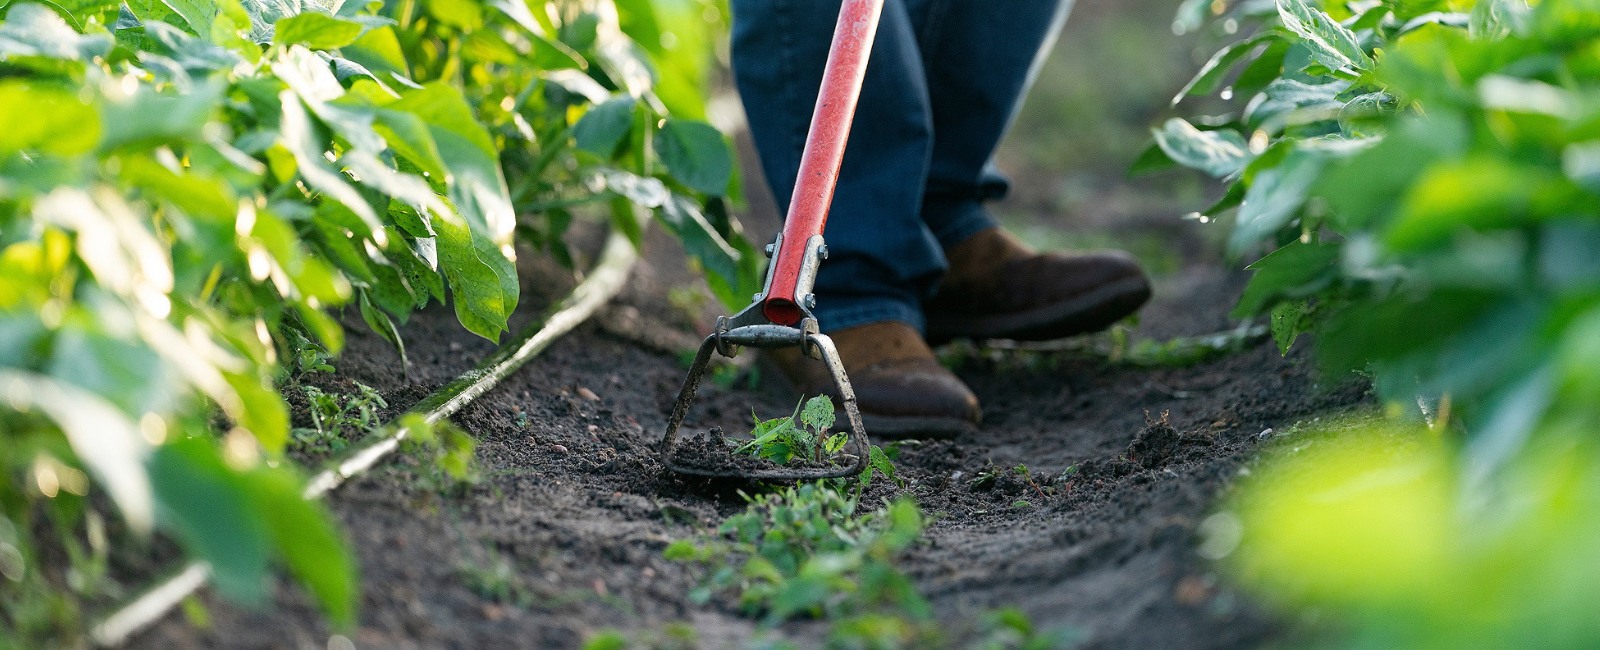 close up of hand hoe chopping weeds in a row crop